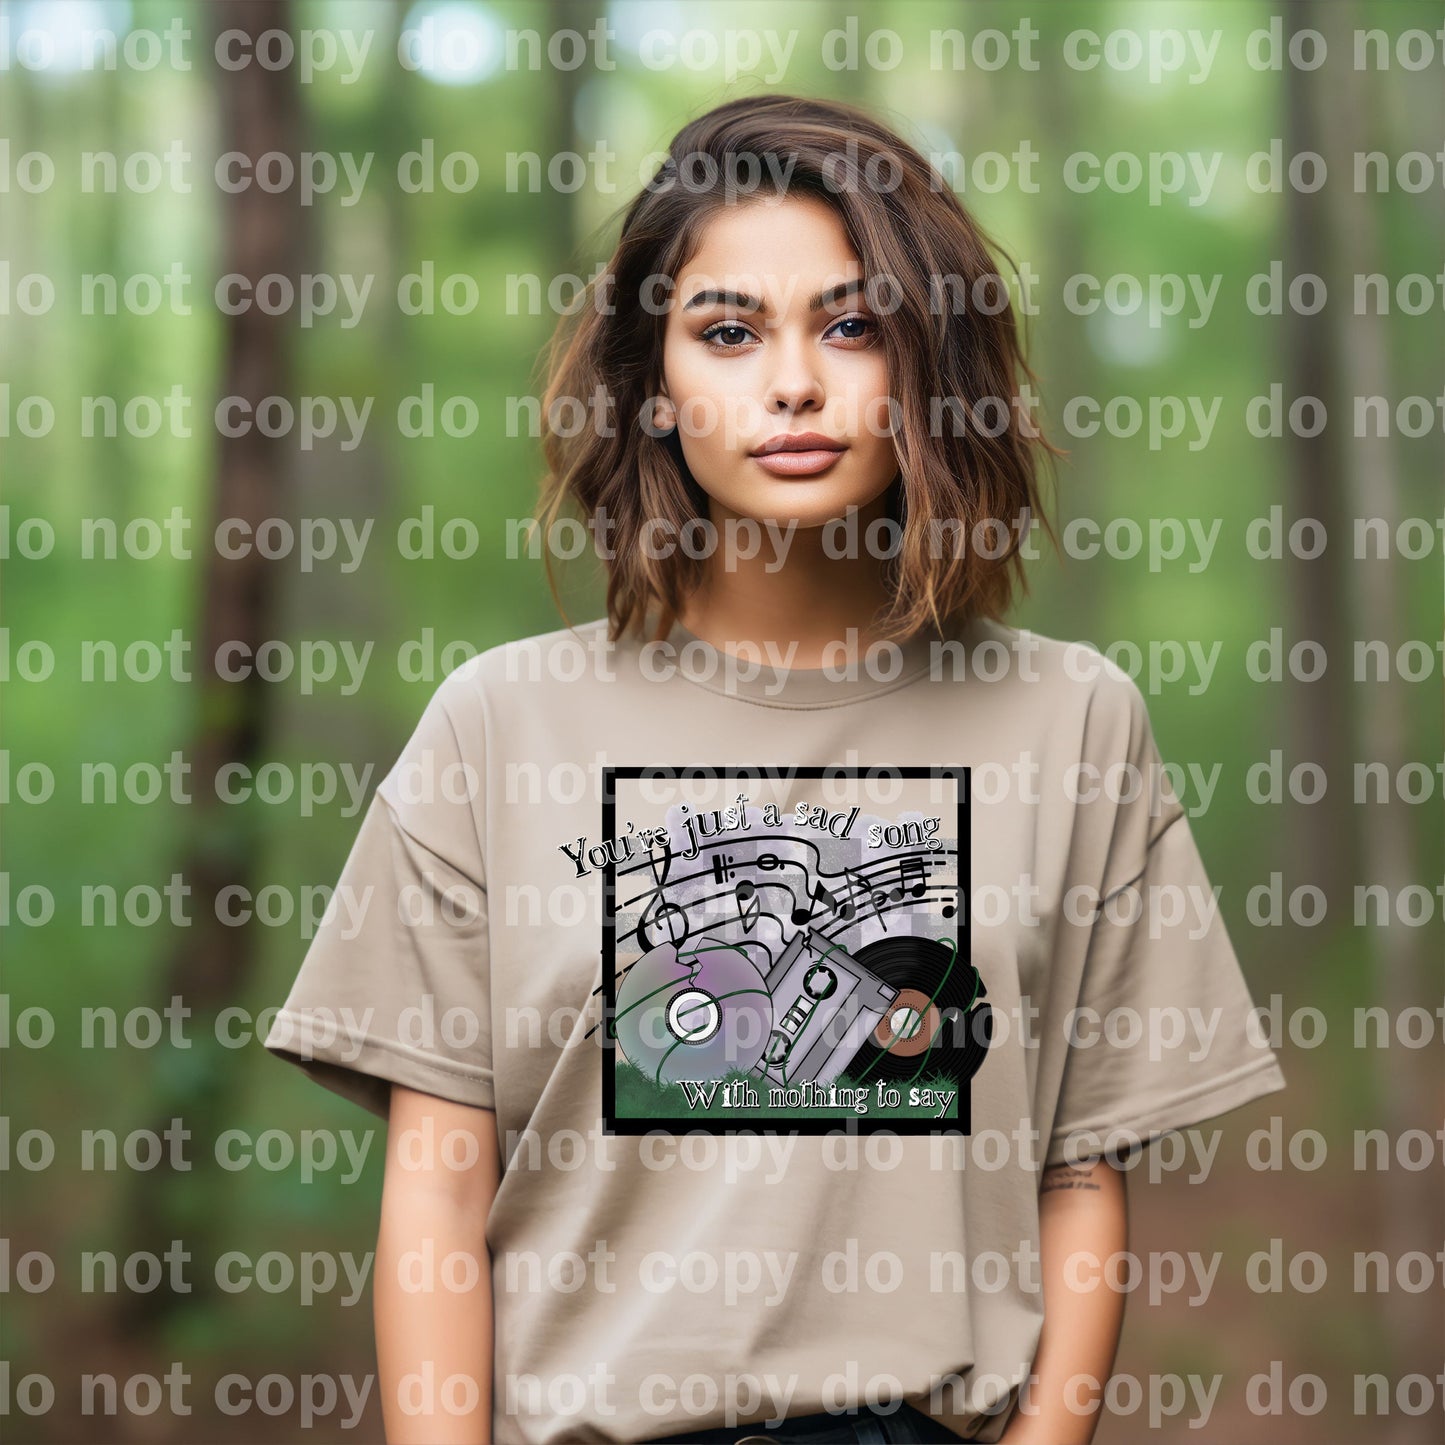 You're Just A Sad Song with Nothing To Say with Optional Two Rows Sleeve Designs Dream Print or Sublimation Print